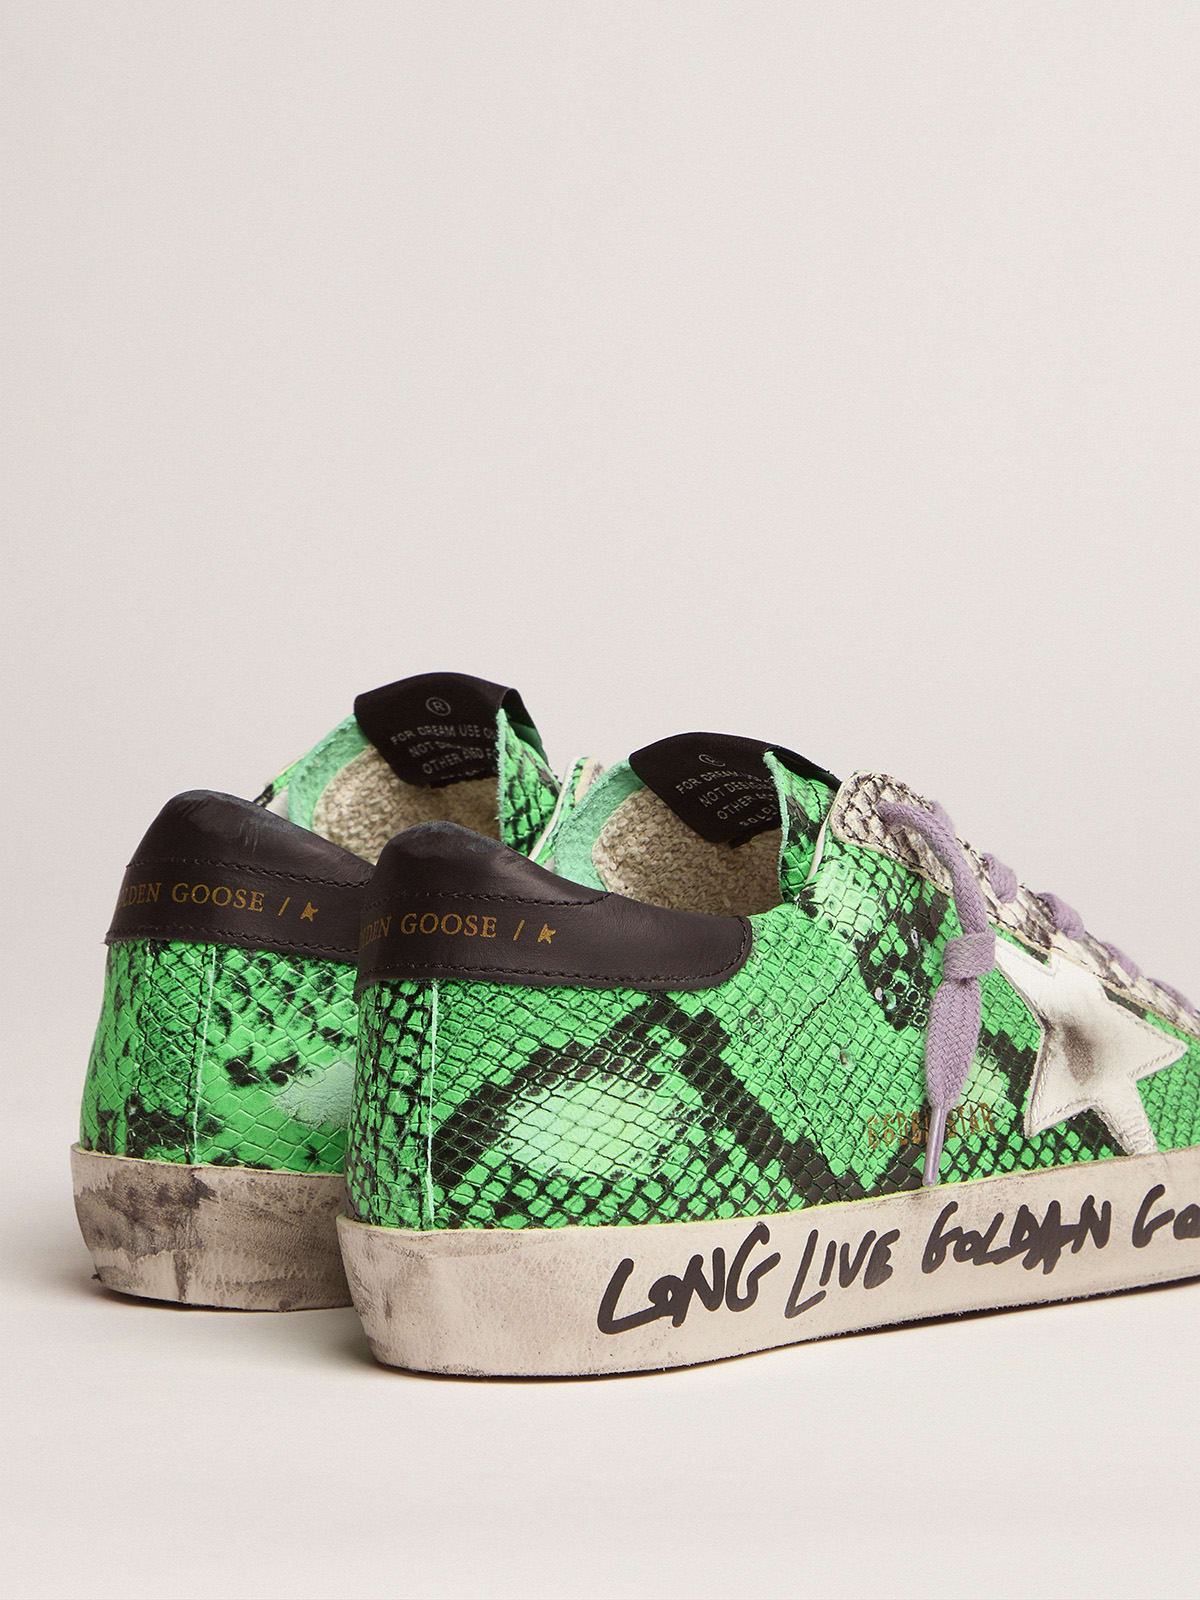 Golden Goose - Super-Star sneakers in two-tone snake-print leather in 